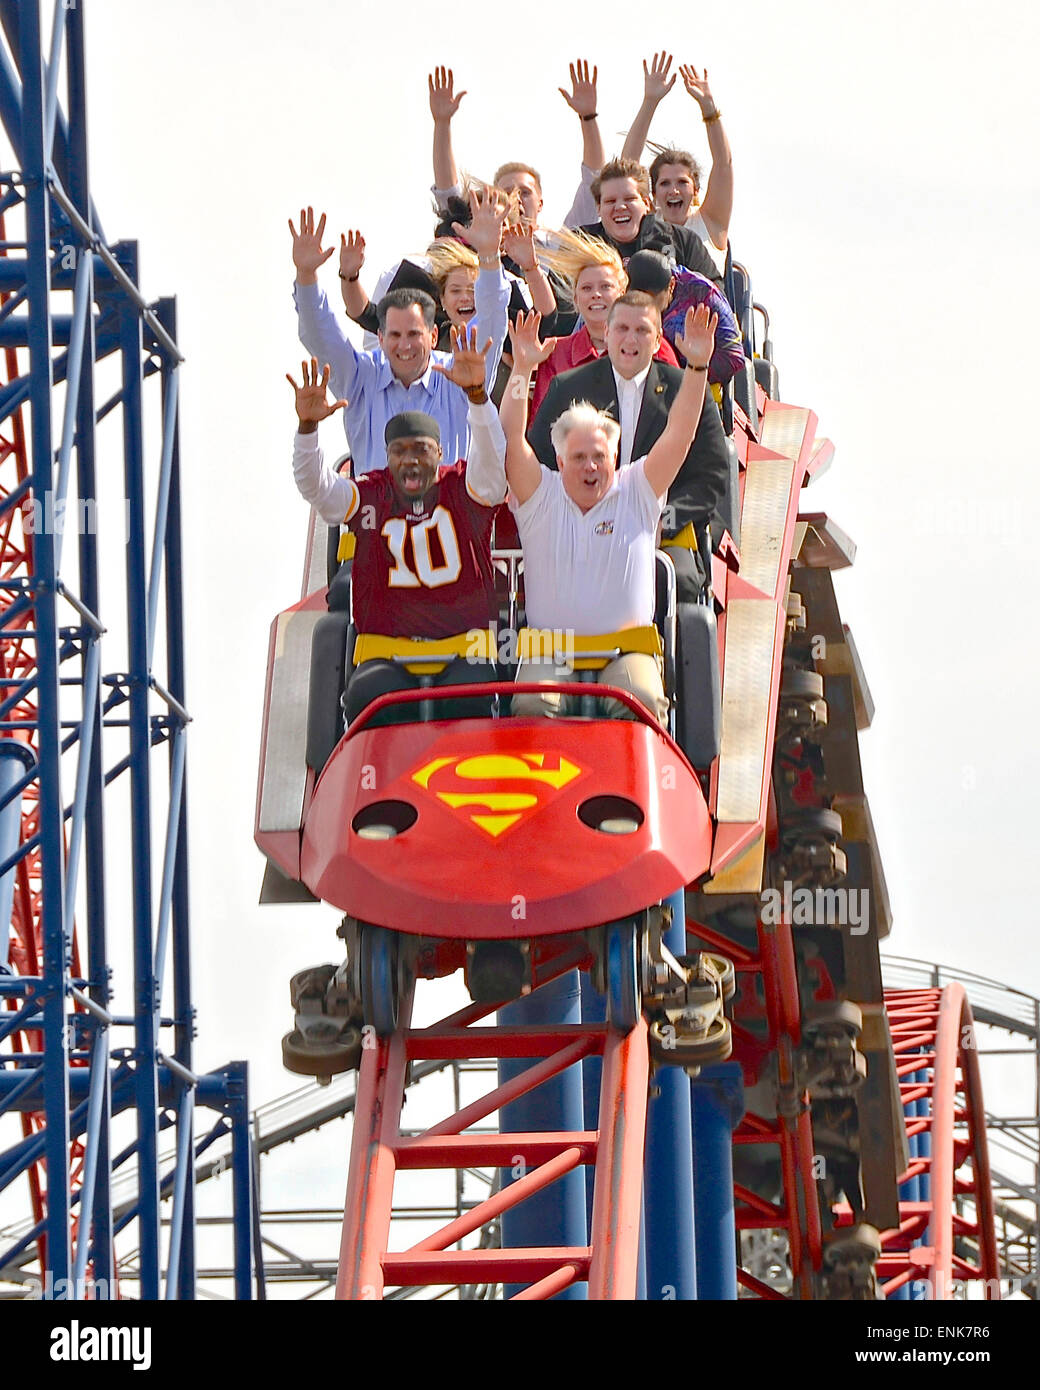 Governor of Maryland Larry Hogan sits with Redskins quarterback Robert Griffin as they ride the Superman roller coaster at Six Flags amusement park April 2, 2015 in Upper Marlboro, Maryland. Stock Photo